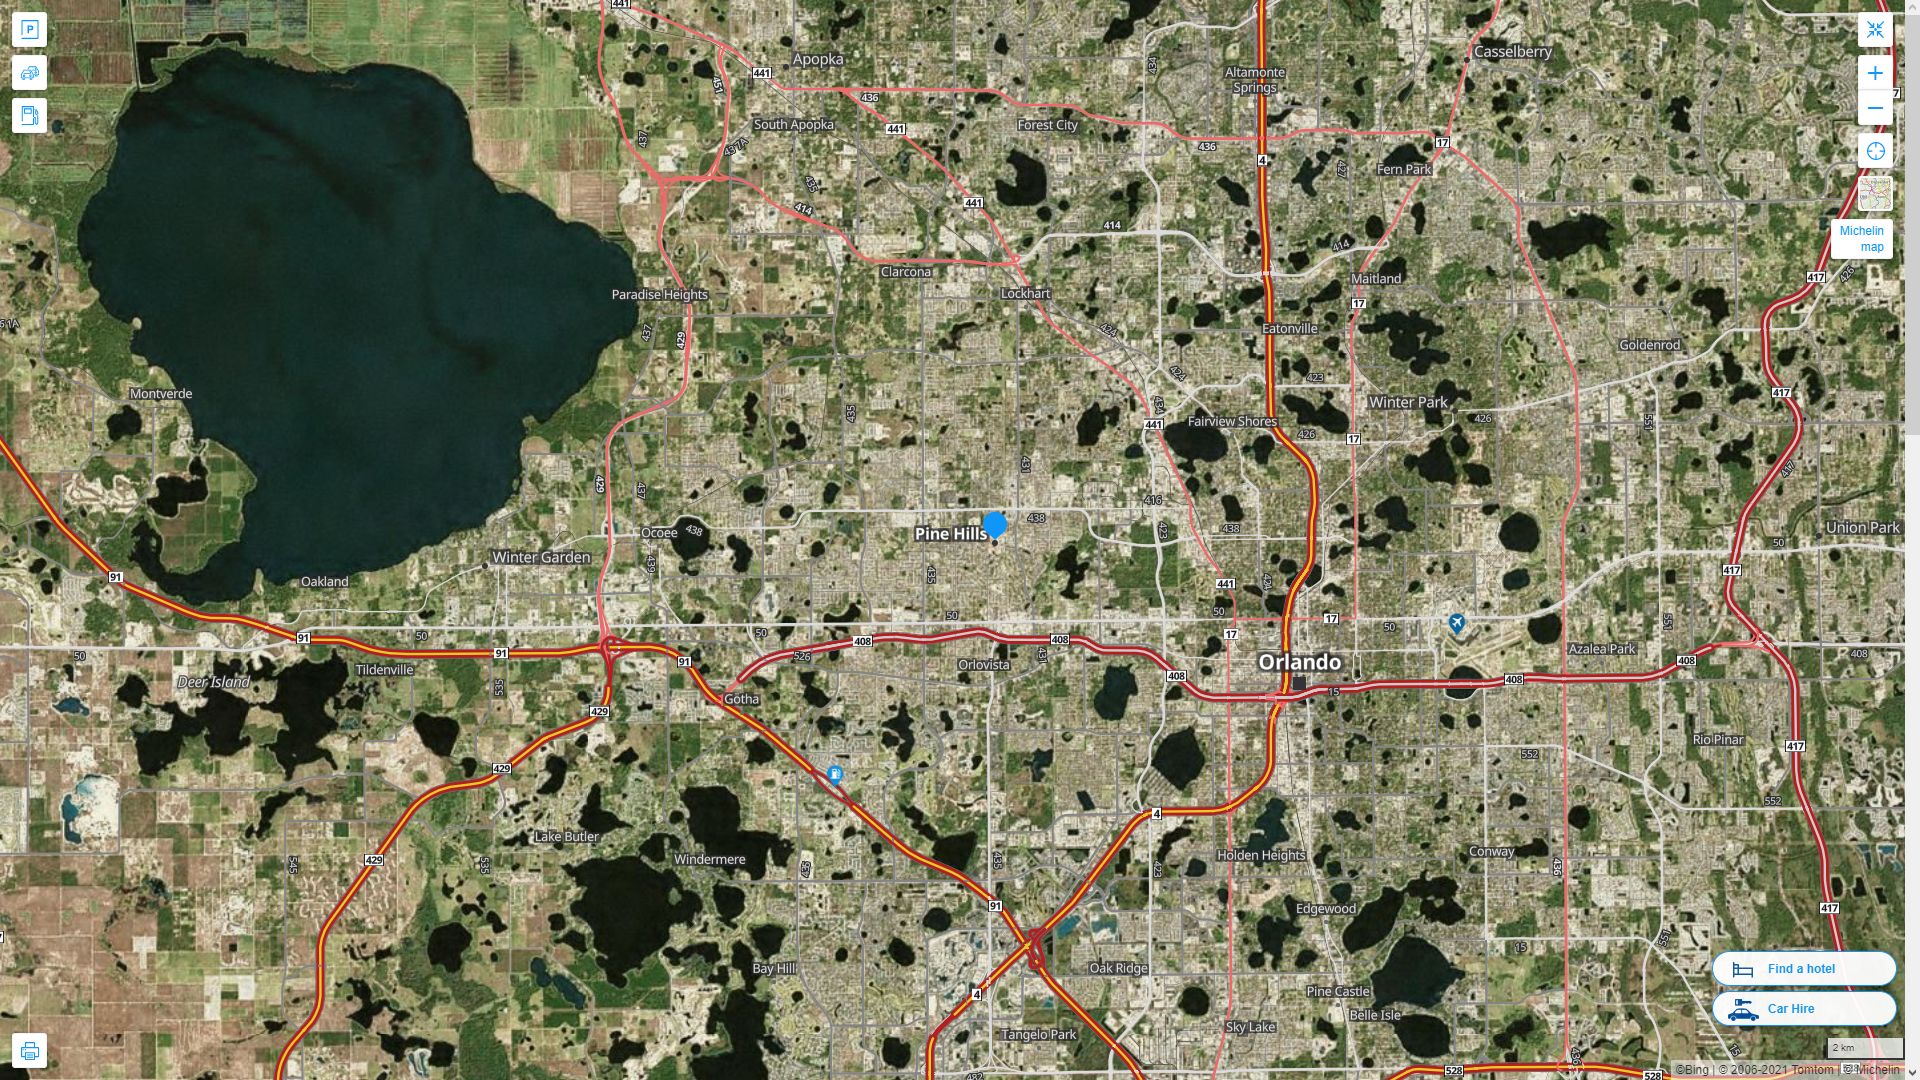 Pine Hills Florida Highway and Road Map with Satellite View